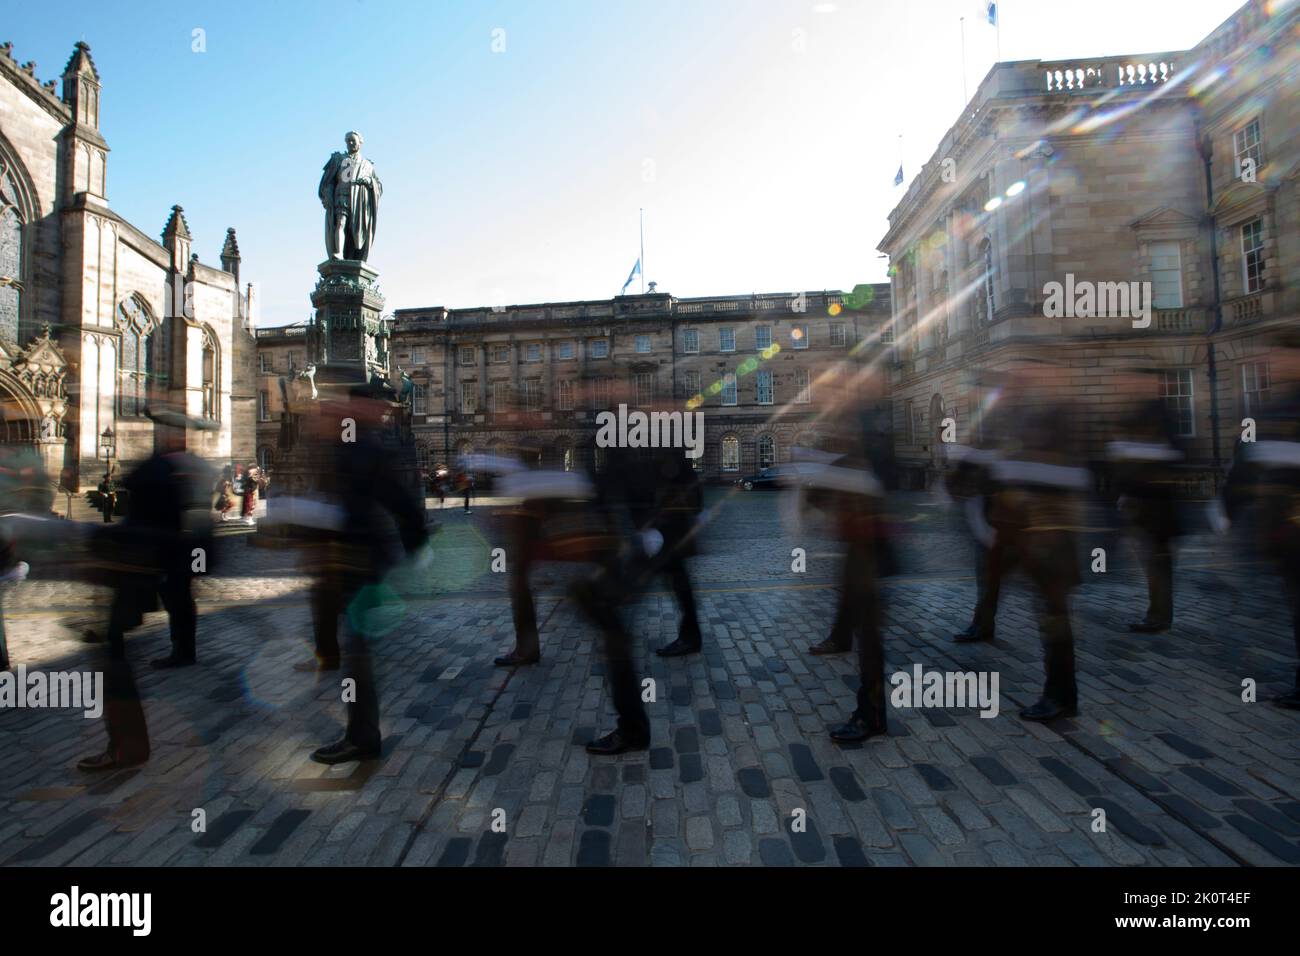 Edinburgh 13th September 20202. The coffin's of Queen Elizabeth II left St Gile's Cathedral in the Royal Mile in Edinburgh . The coffin's of Queen Elizabeth II will travel to England. The Queen died peacefully at Balmoral on 8th September 2022. Scotland Pic Credit: Pako Mera/Alamy Live News Stock Photo